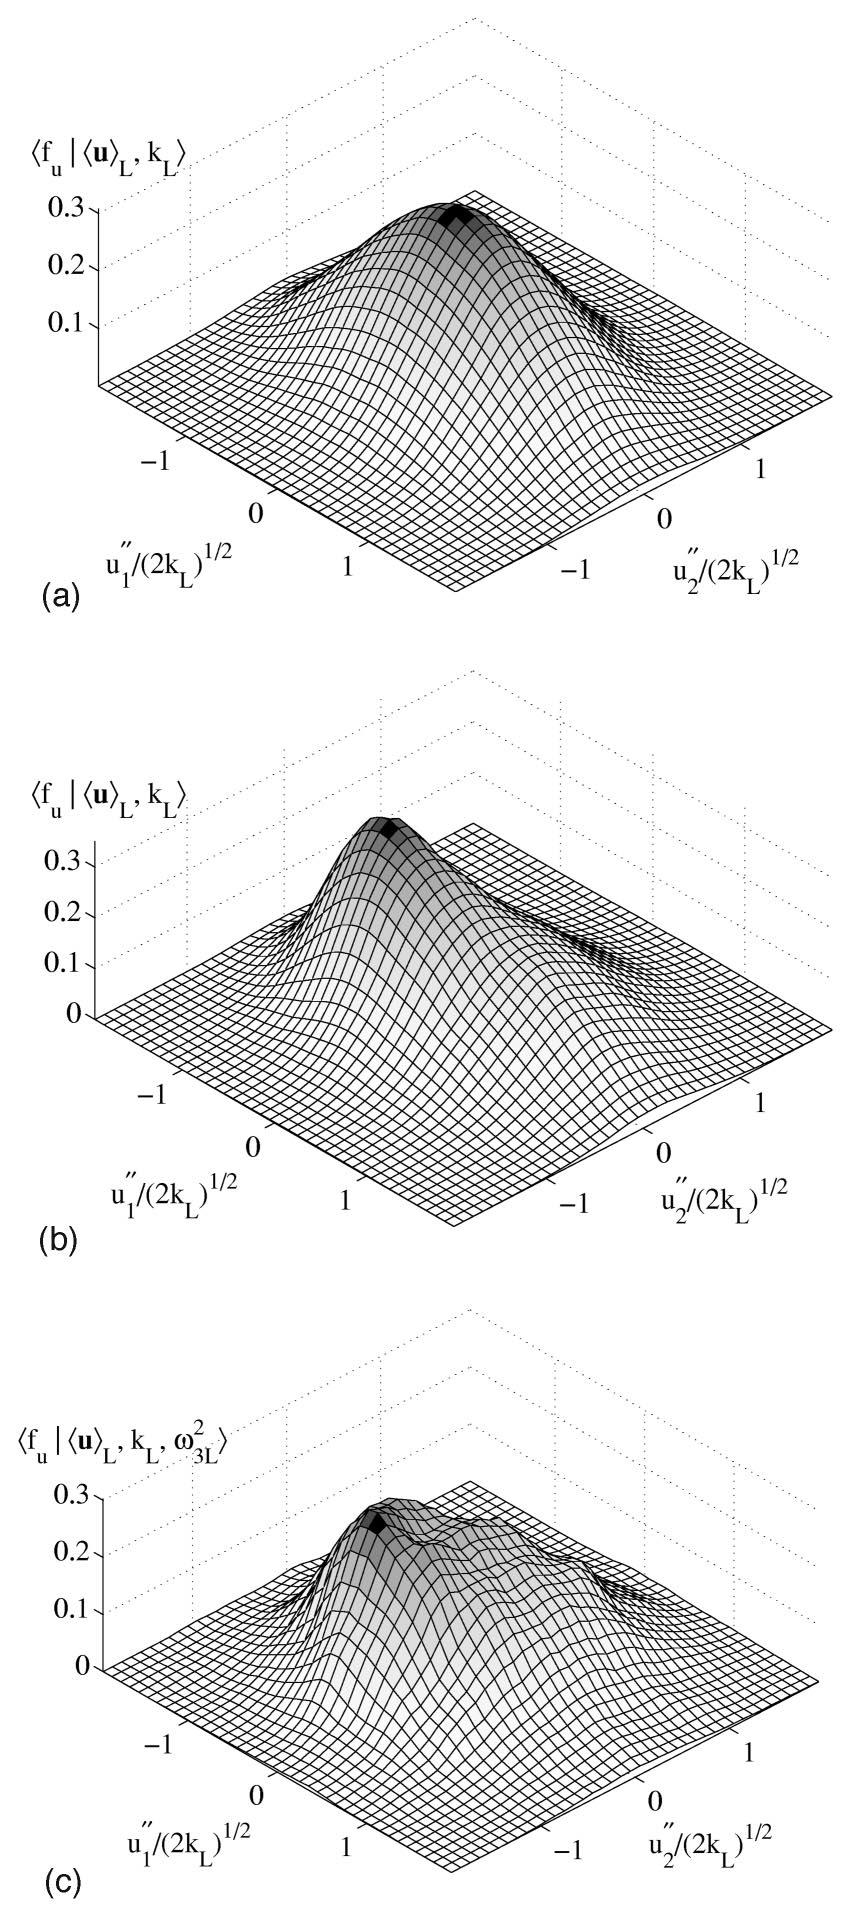 3606 Phys. Fluids, Vol. 16, No. 10, October 2004 Wang, Tong, and Pope FIG. 5. (a) A plane strain field with a random orientation with respect to the laboratory coordinate system.